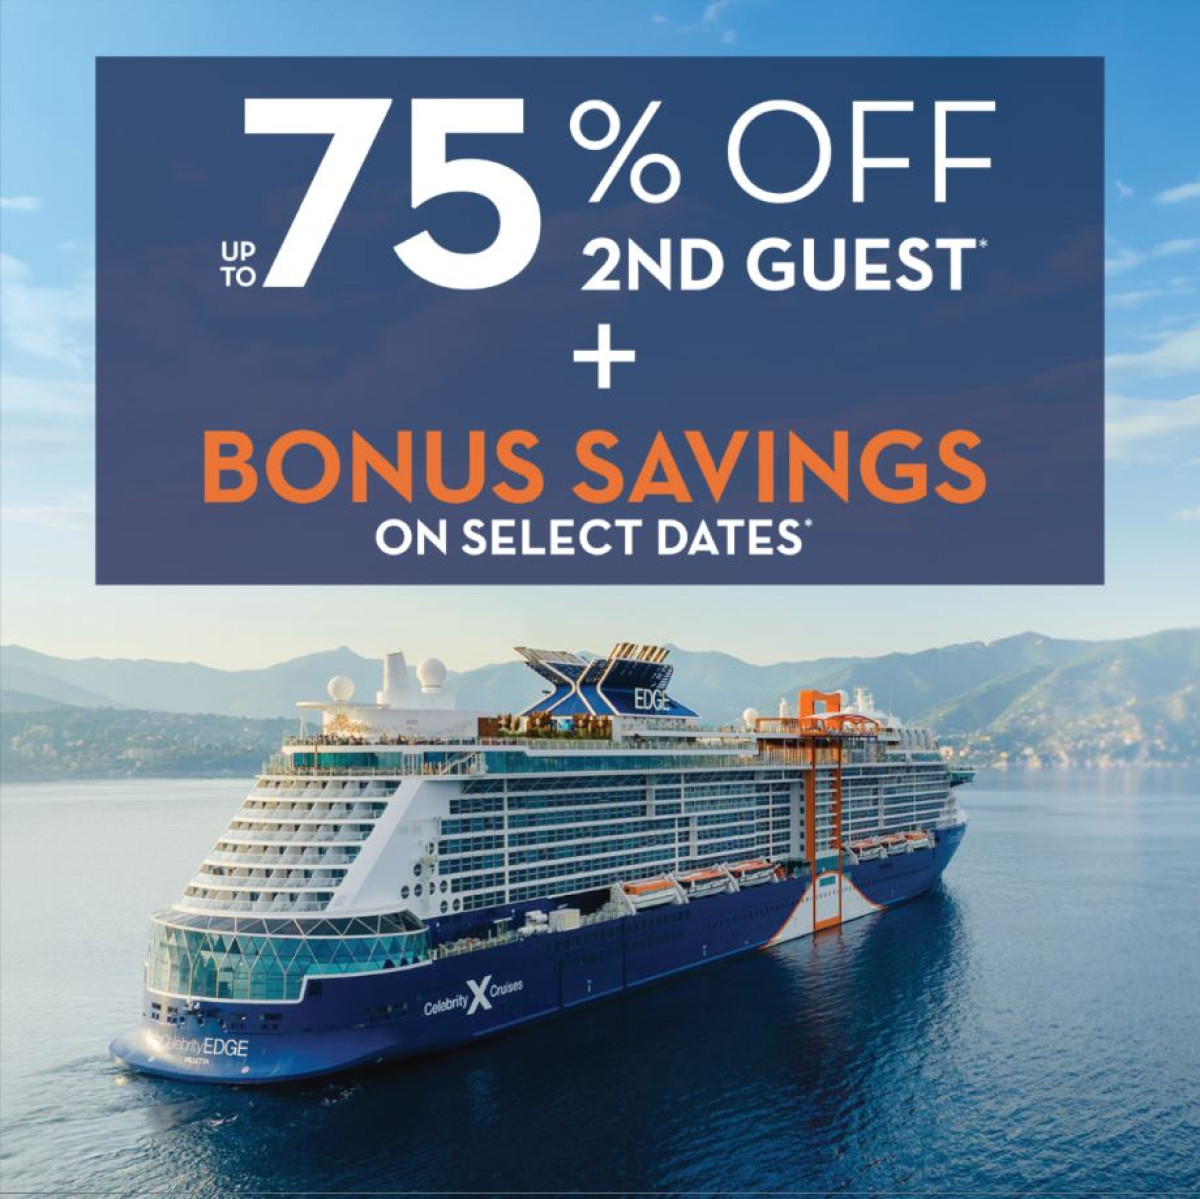 Save up to 75% Off Second Guest on Celebrity Cruises PLUS Exciting ...